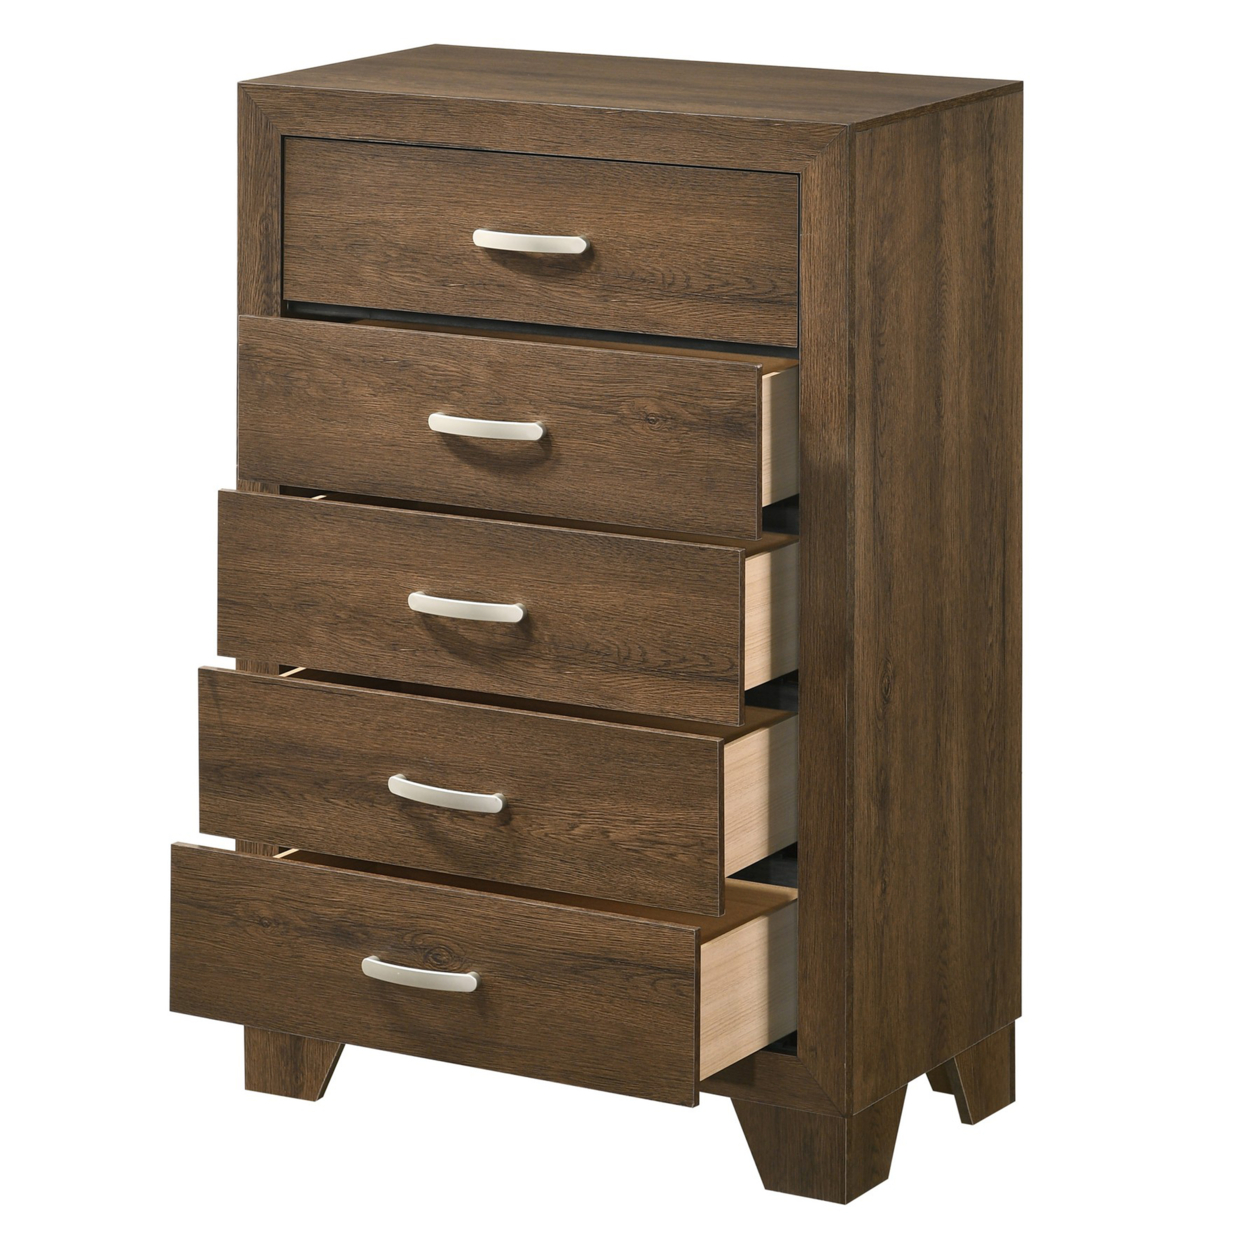 Transitional Style Wooden Chest With 2 Drawers And Metal Handles, Brown- Saltoro Sherpi